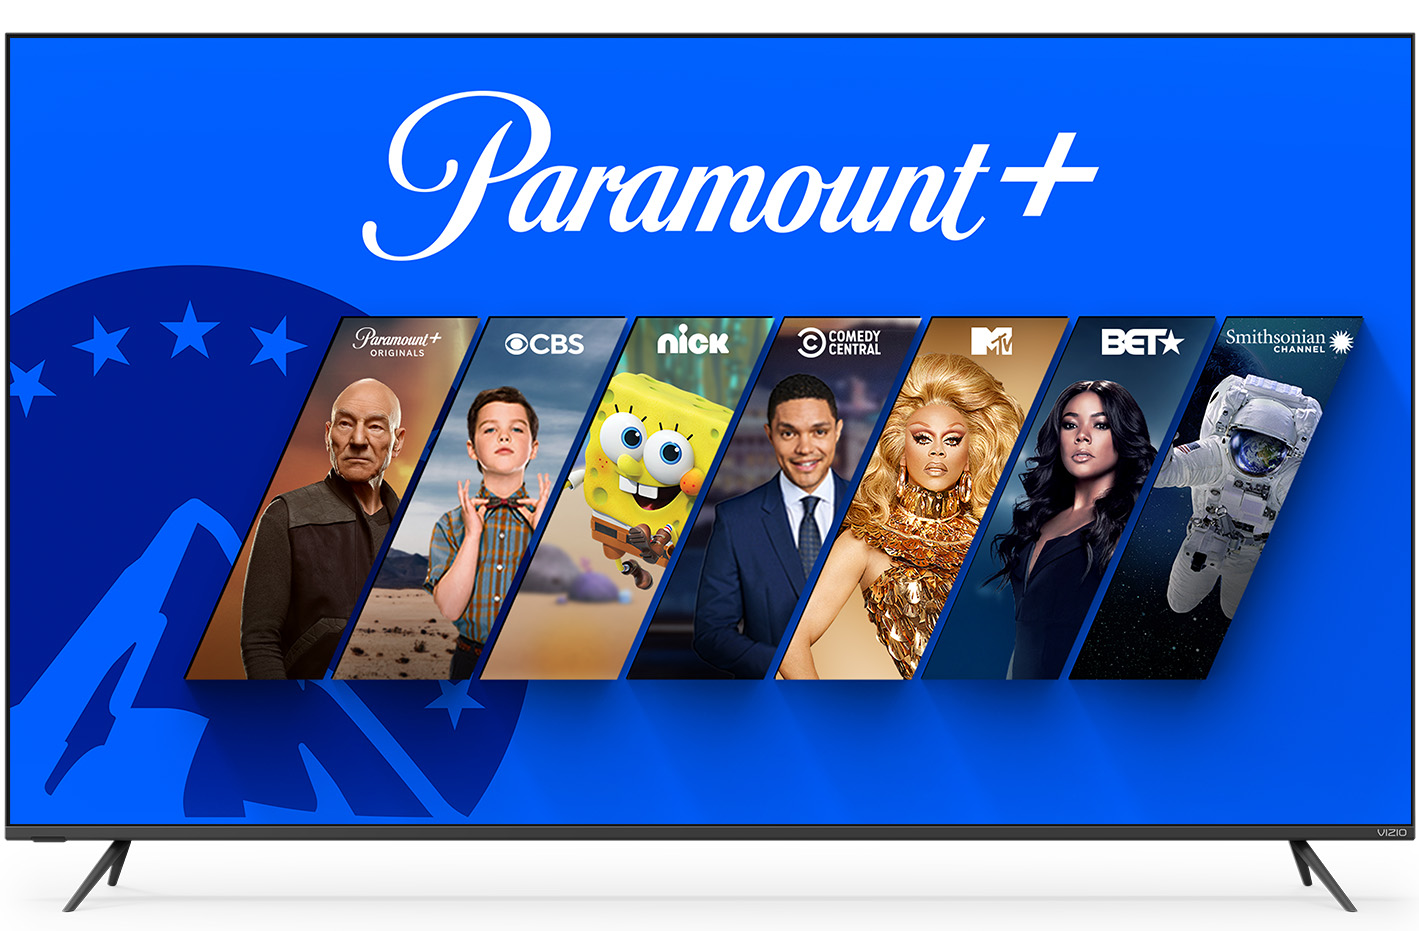 paramount+ how to watch nfl